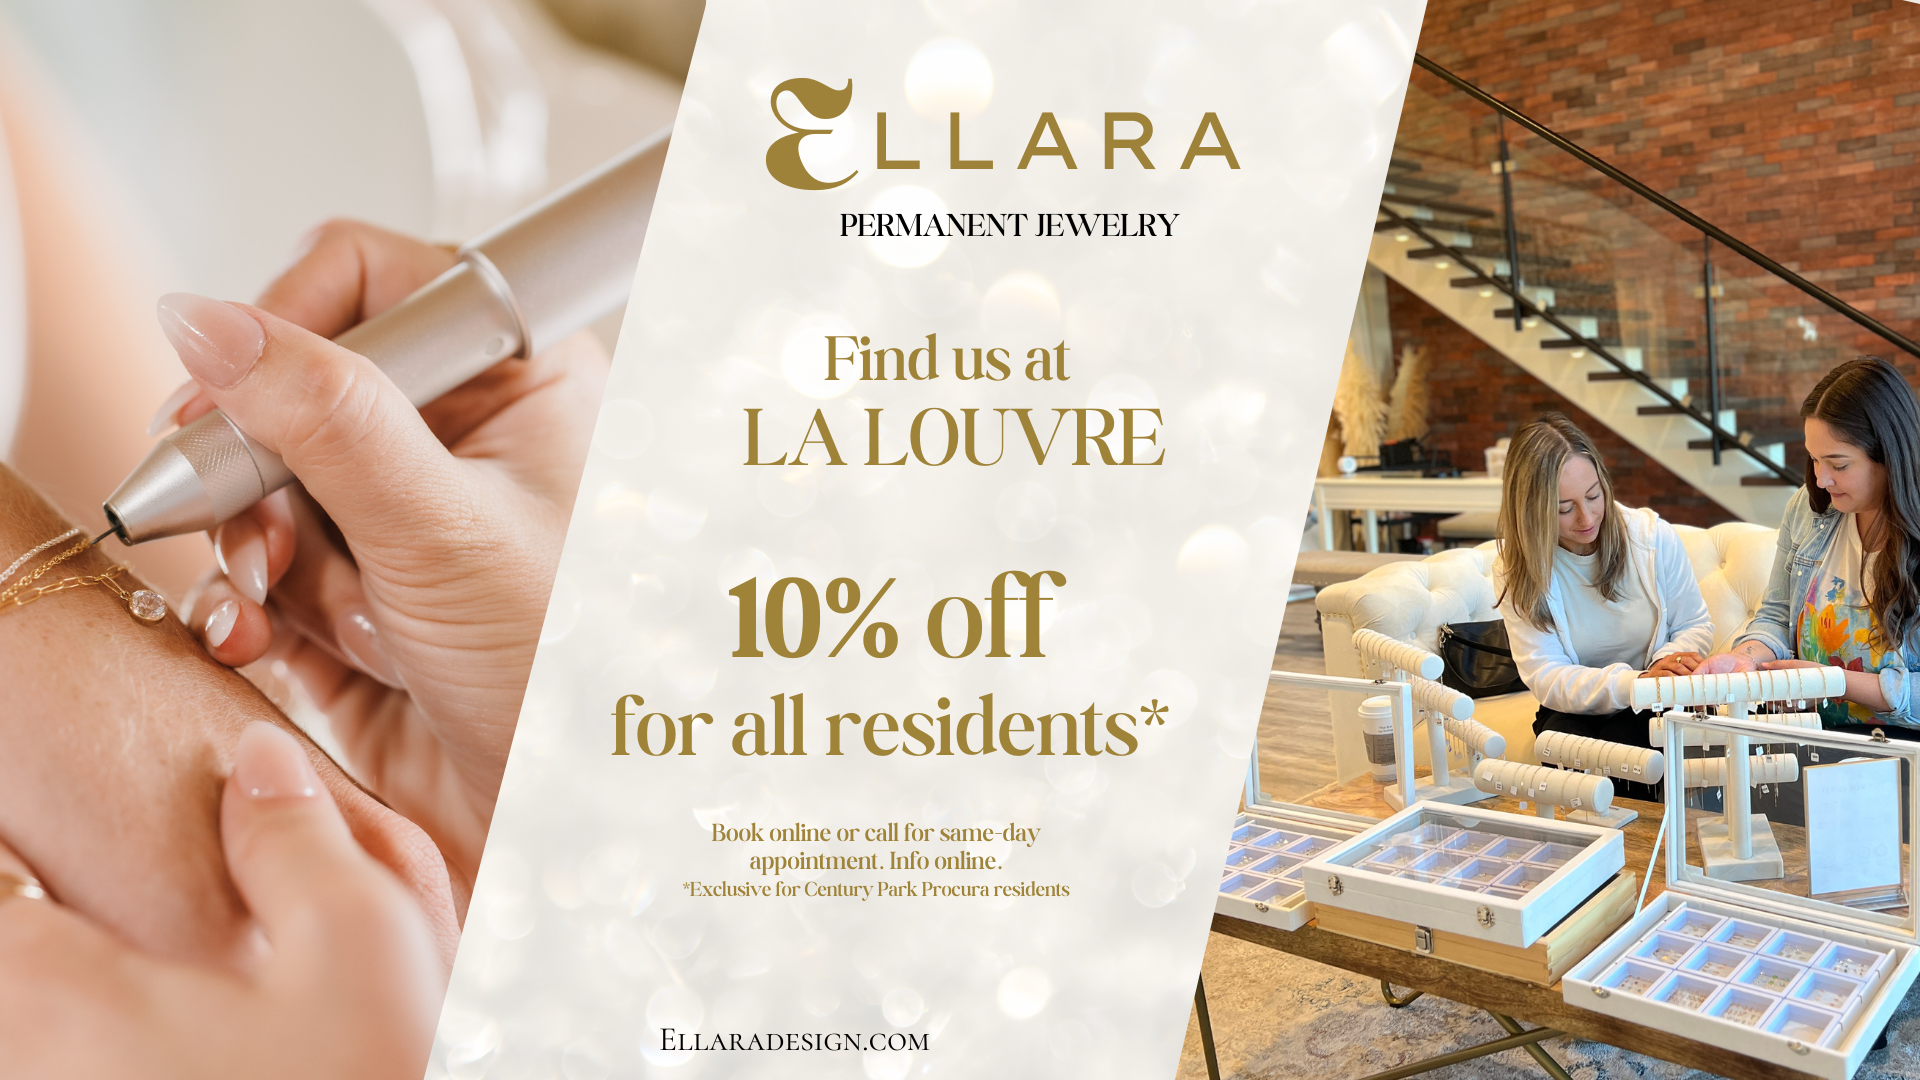 Ellara Permanent Jewelry at La Louvre 10% Off for all Residents